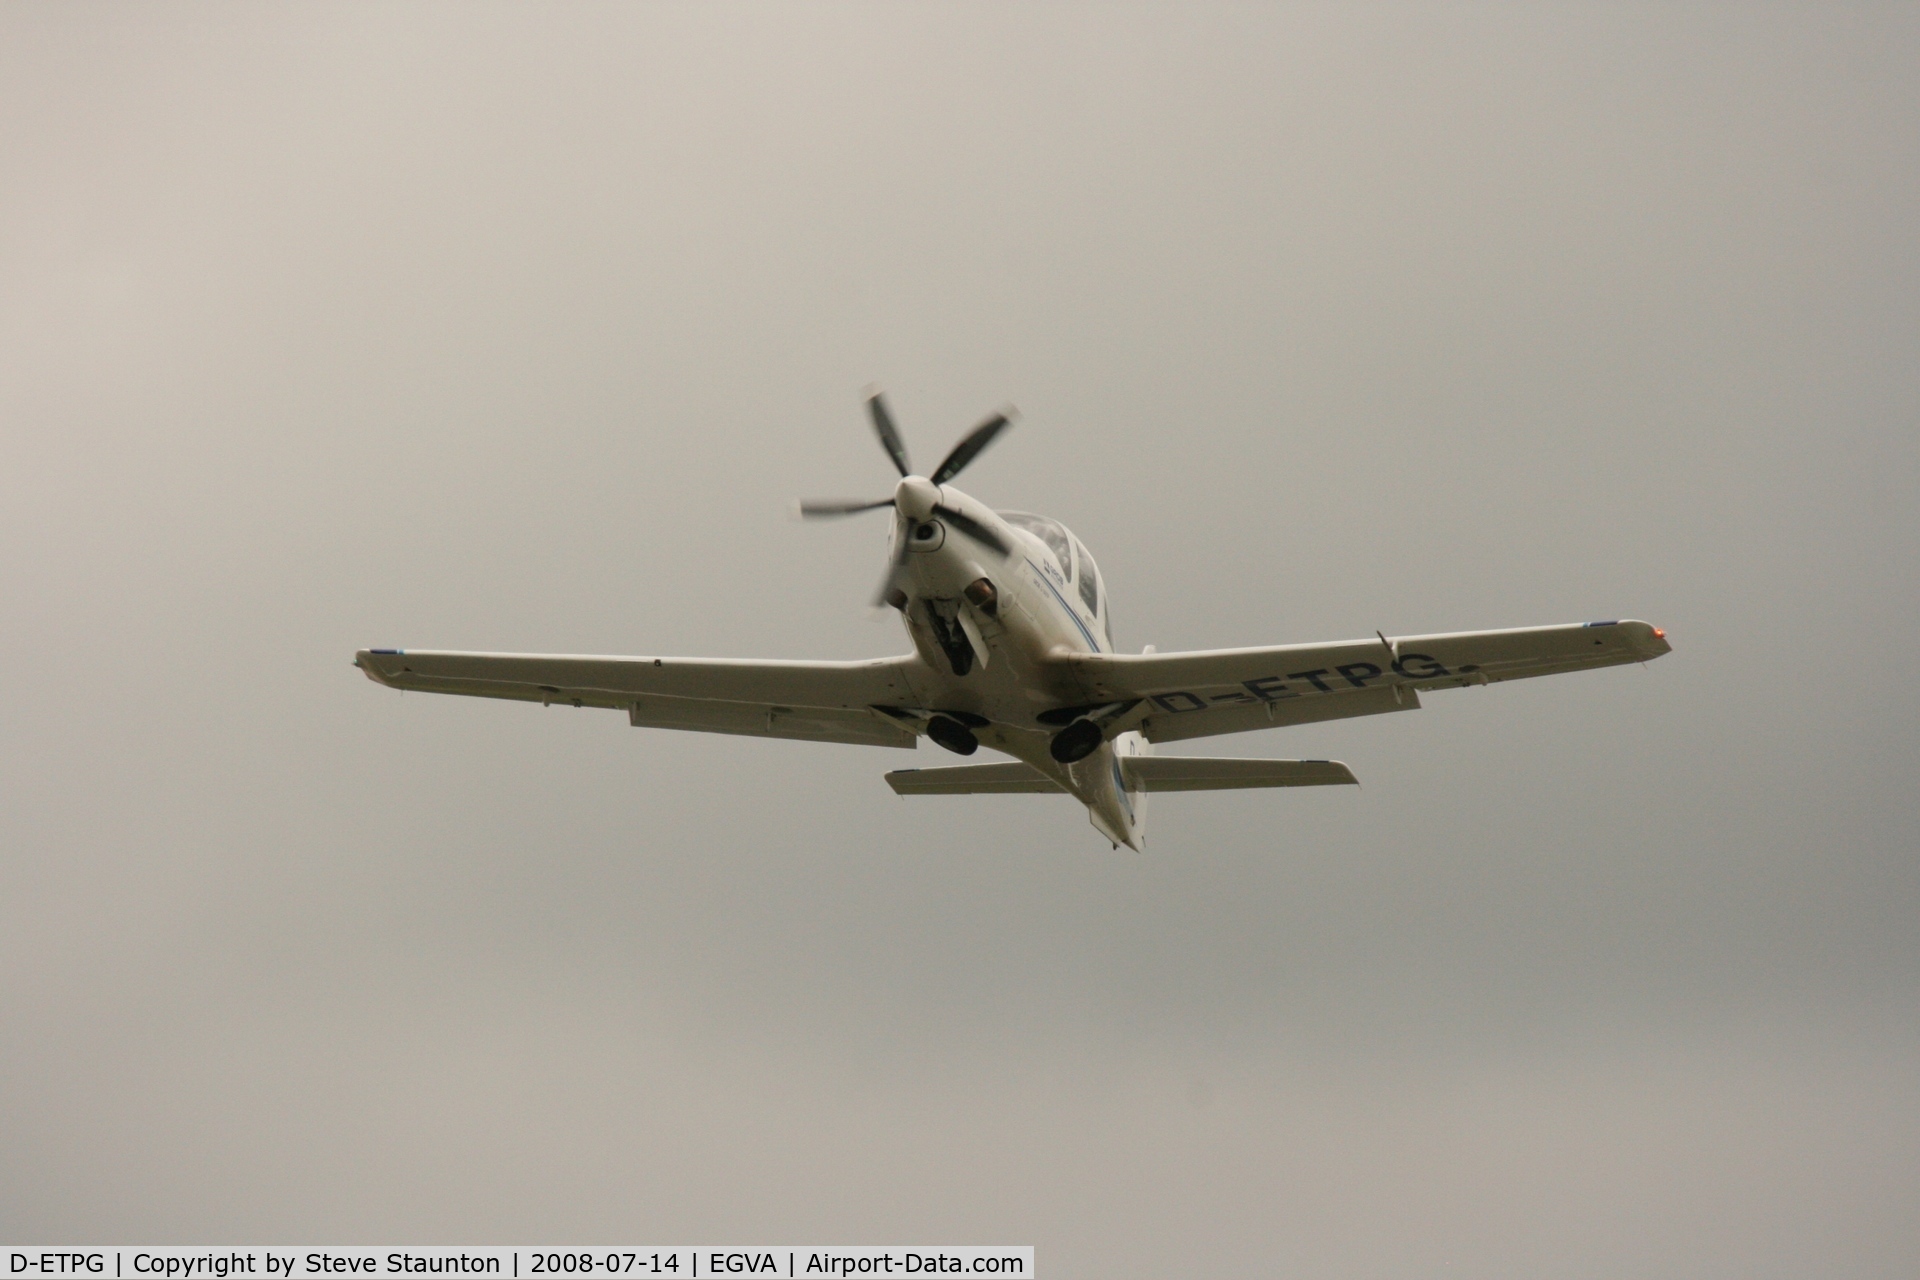 Taken at the Royal International Air Tattoo 2008 during arrivals and